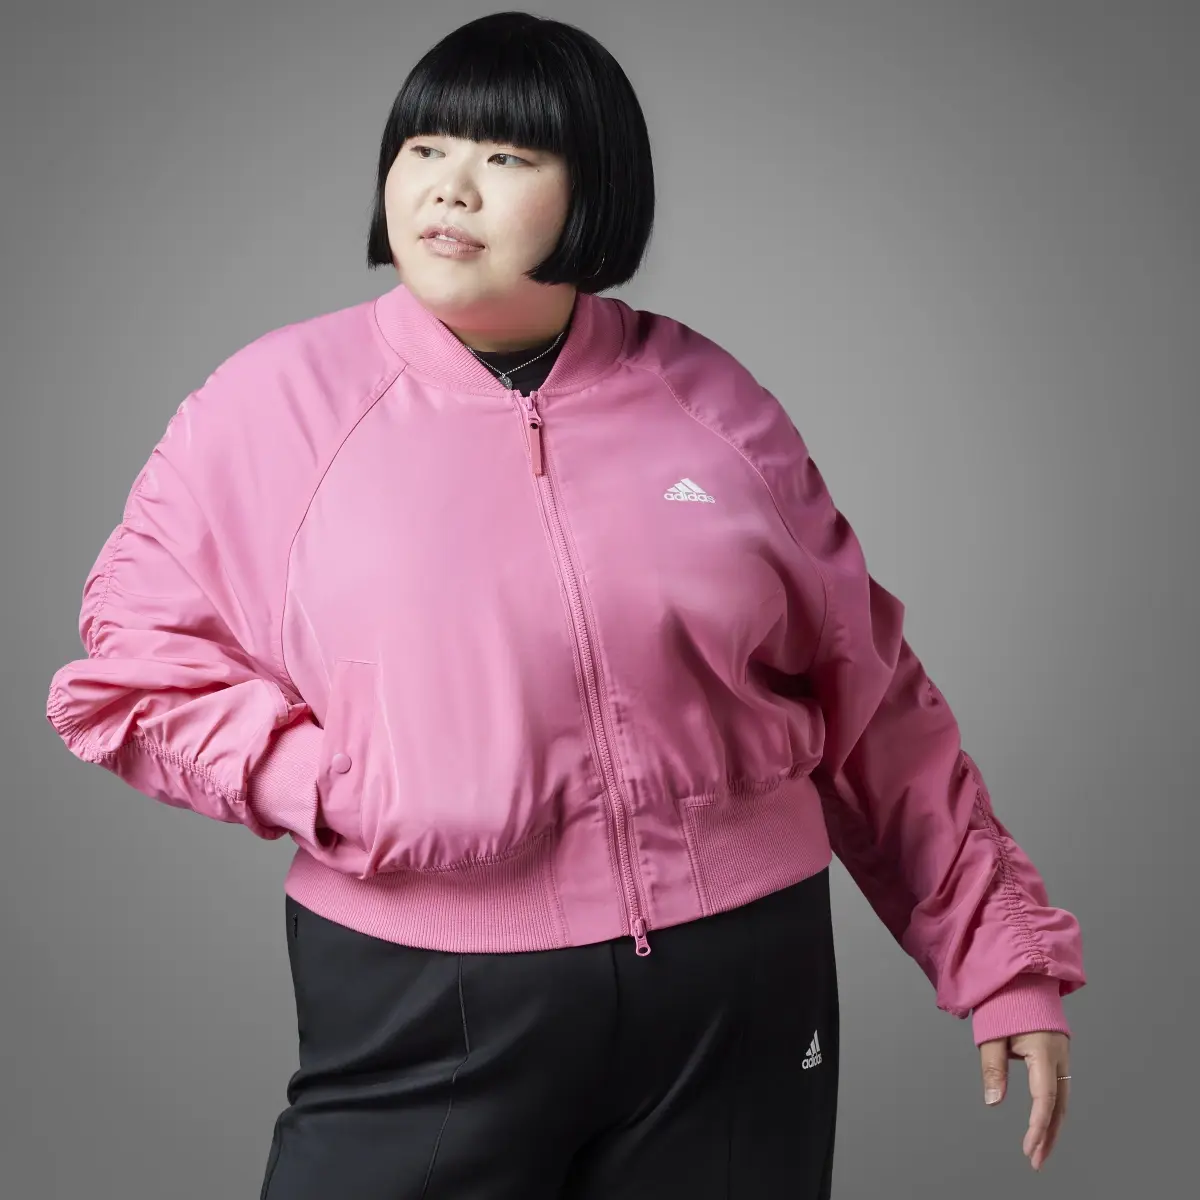 Adidas Collective Power Bomber Jacket (Plus Size). 1